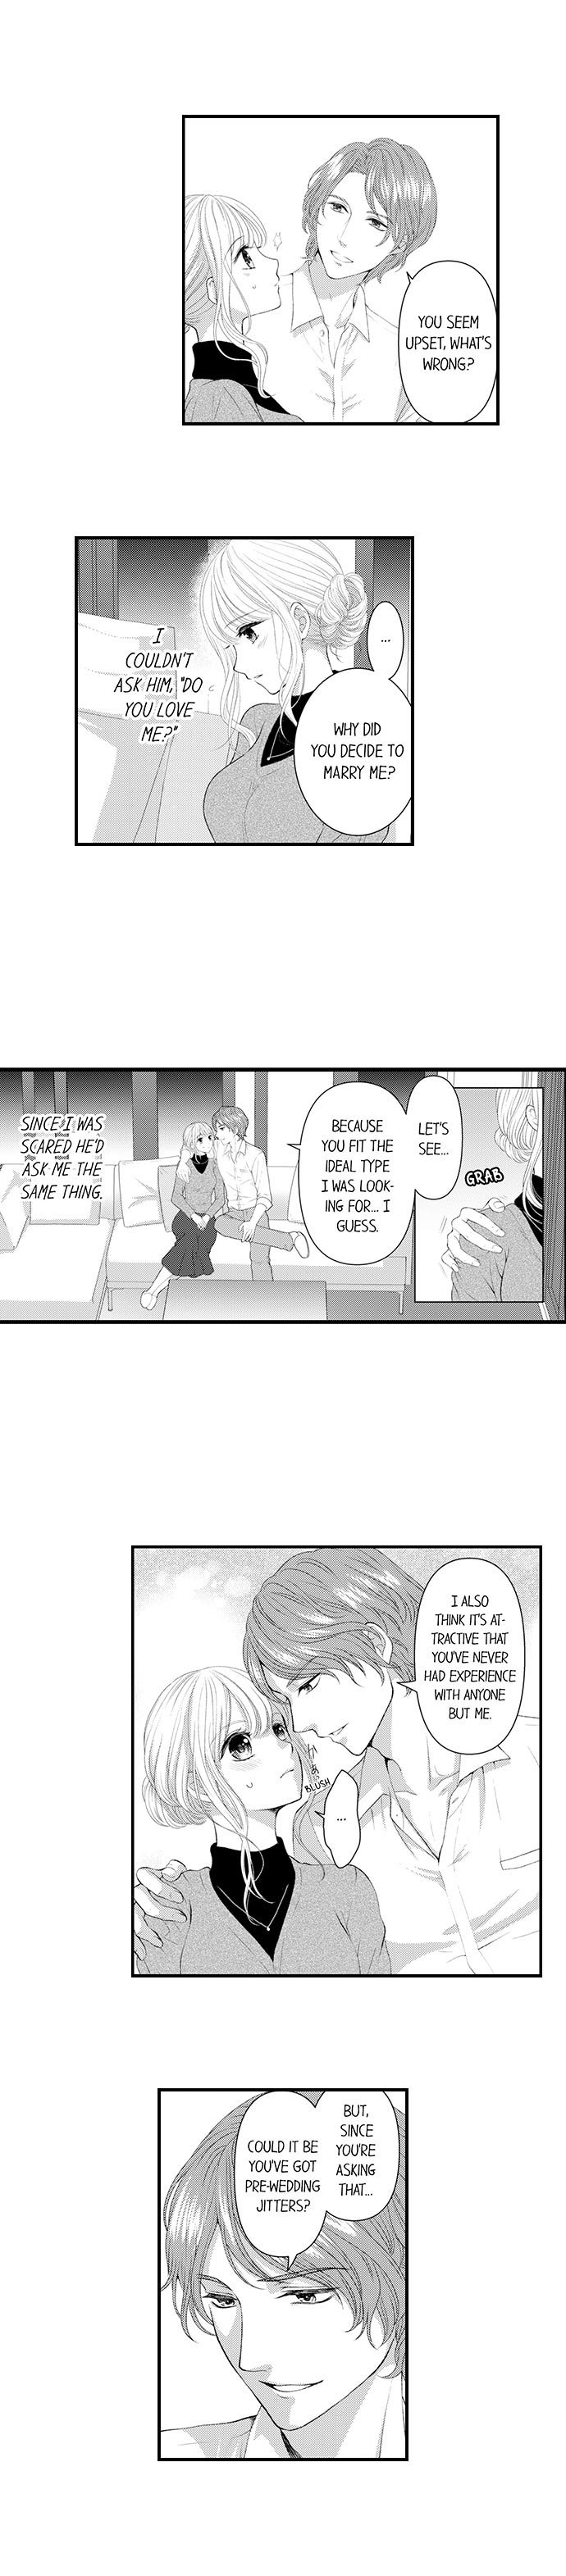 Cheating in a One-Sided Relationship - Chapter 8 Page 4